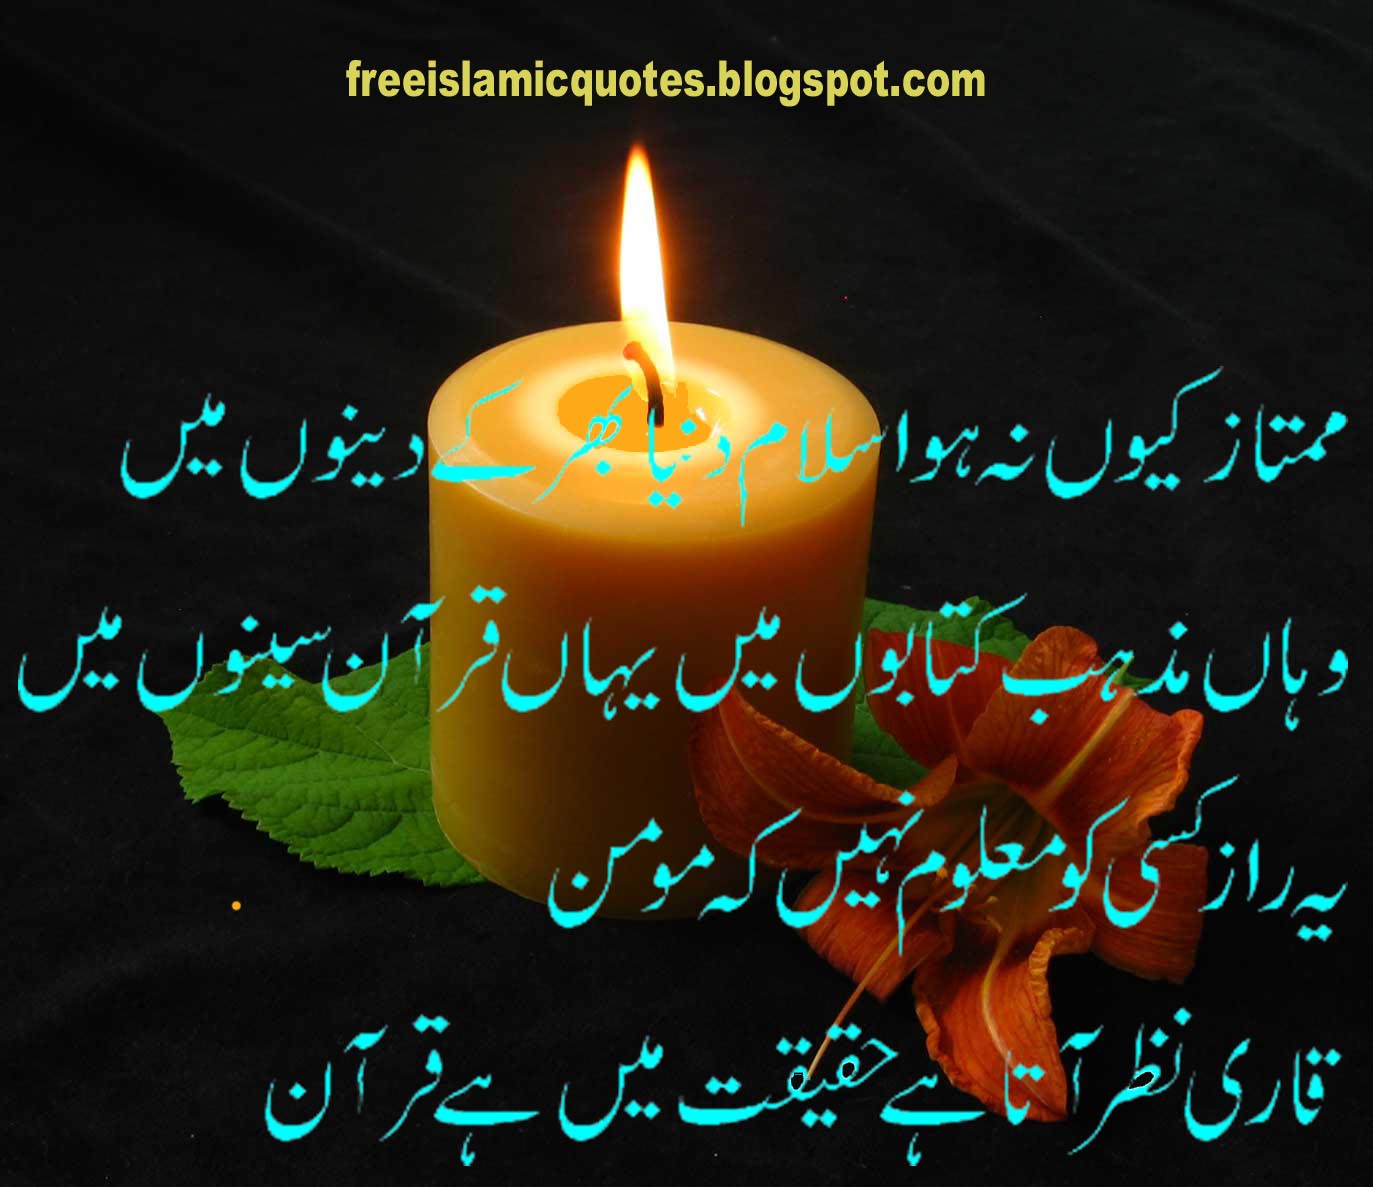 Islamic Quotes In Urdu Wallpapers Inspirational Islamic Poetry